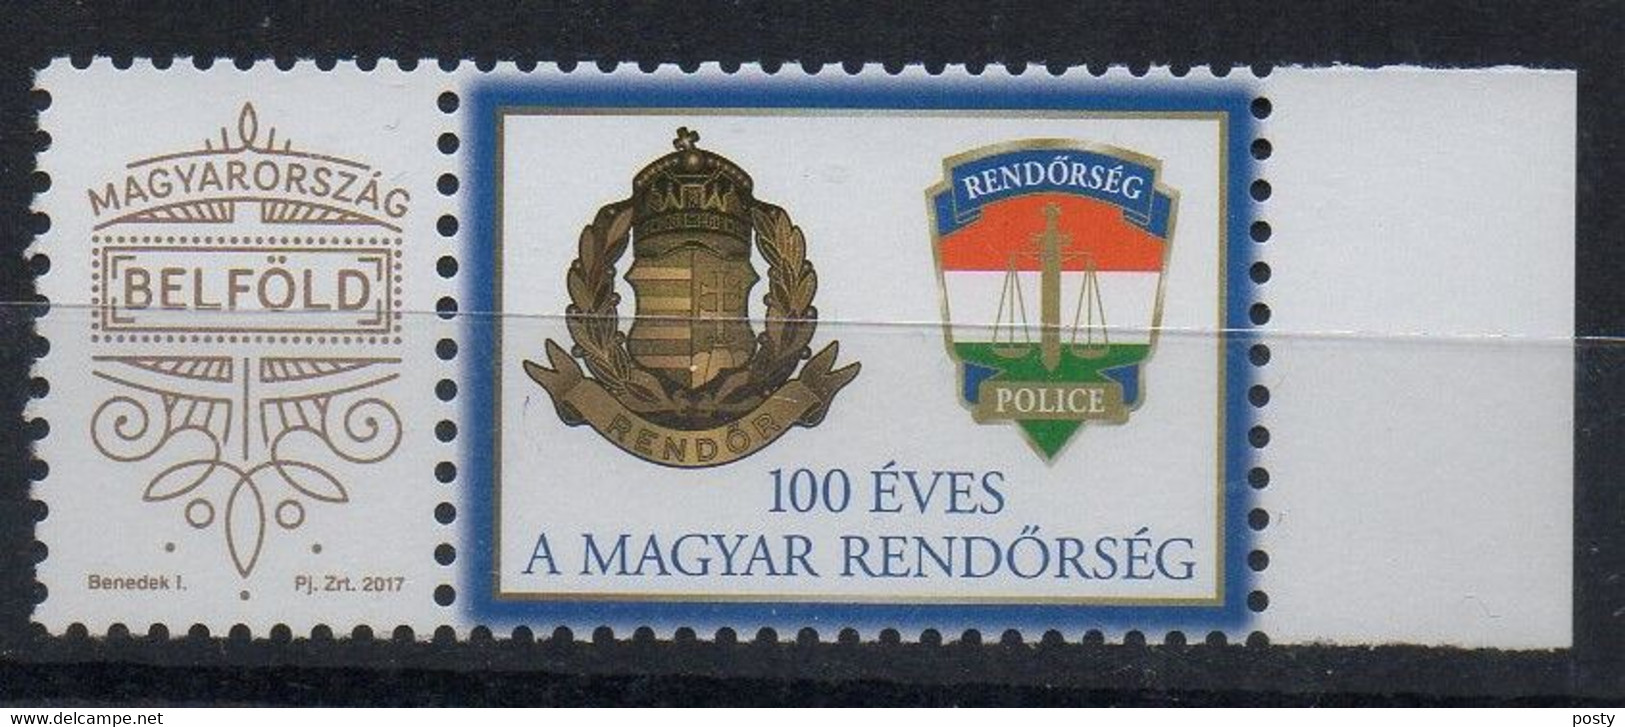 HONGRIE - HUNGARY - 2017 - TIMBRE PERSONALISE - BELFÖLD - BLASON - COAT OF ARMS - POLICE - - Proofs & Reprints